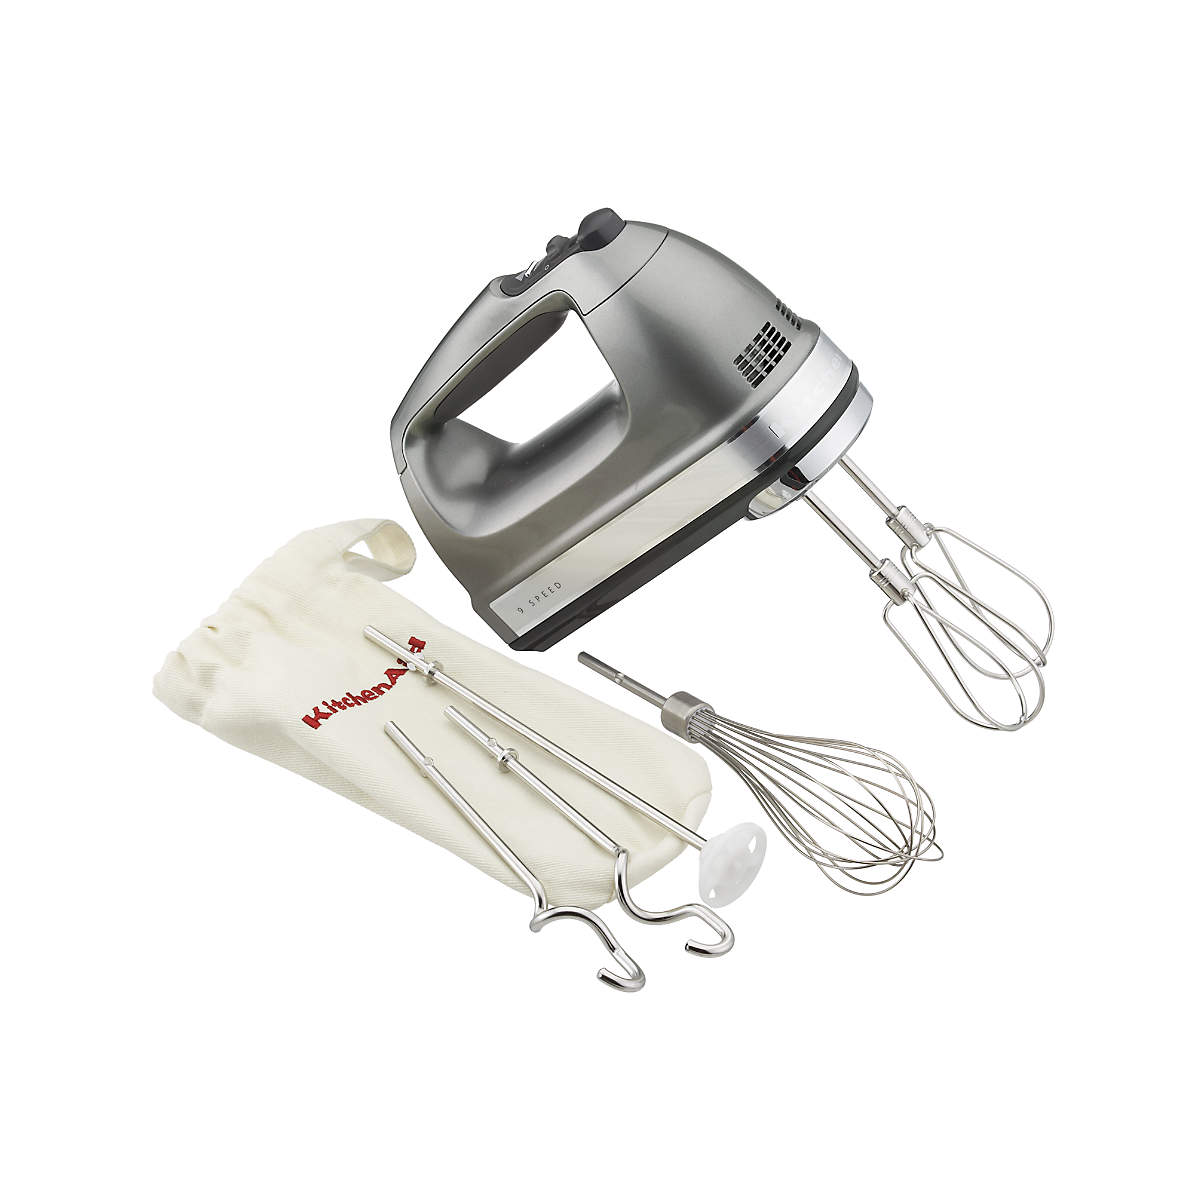 Kitchenaid Silver 9 Speed Contour Hand Mixer Reviews Crate And Barrel Canada